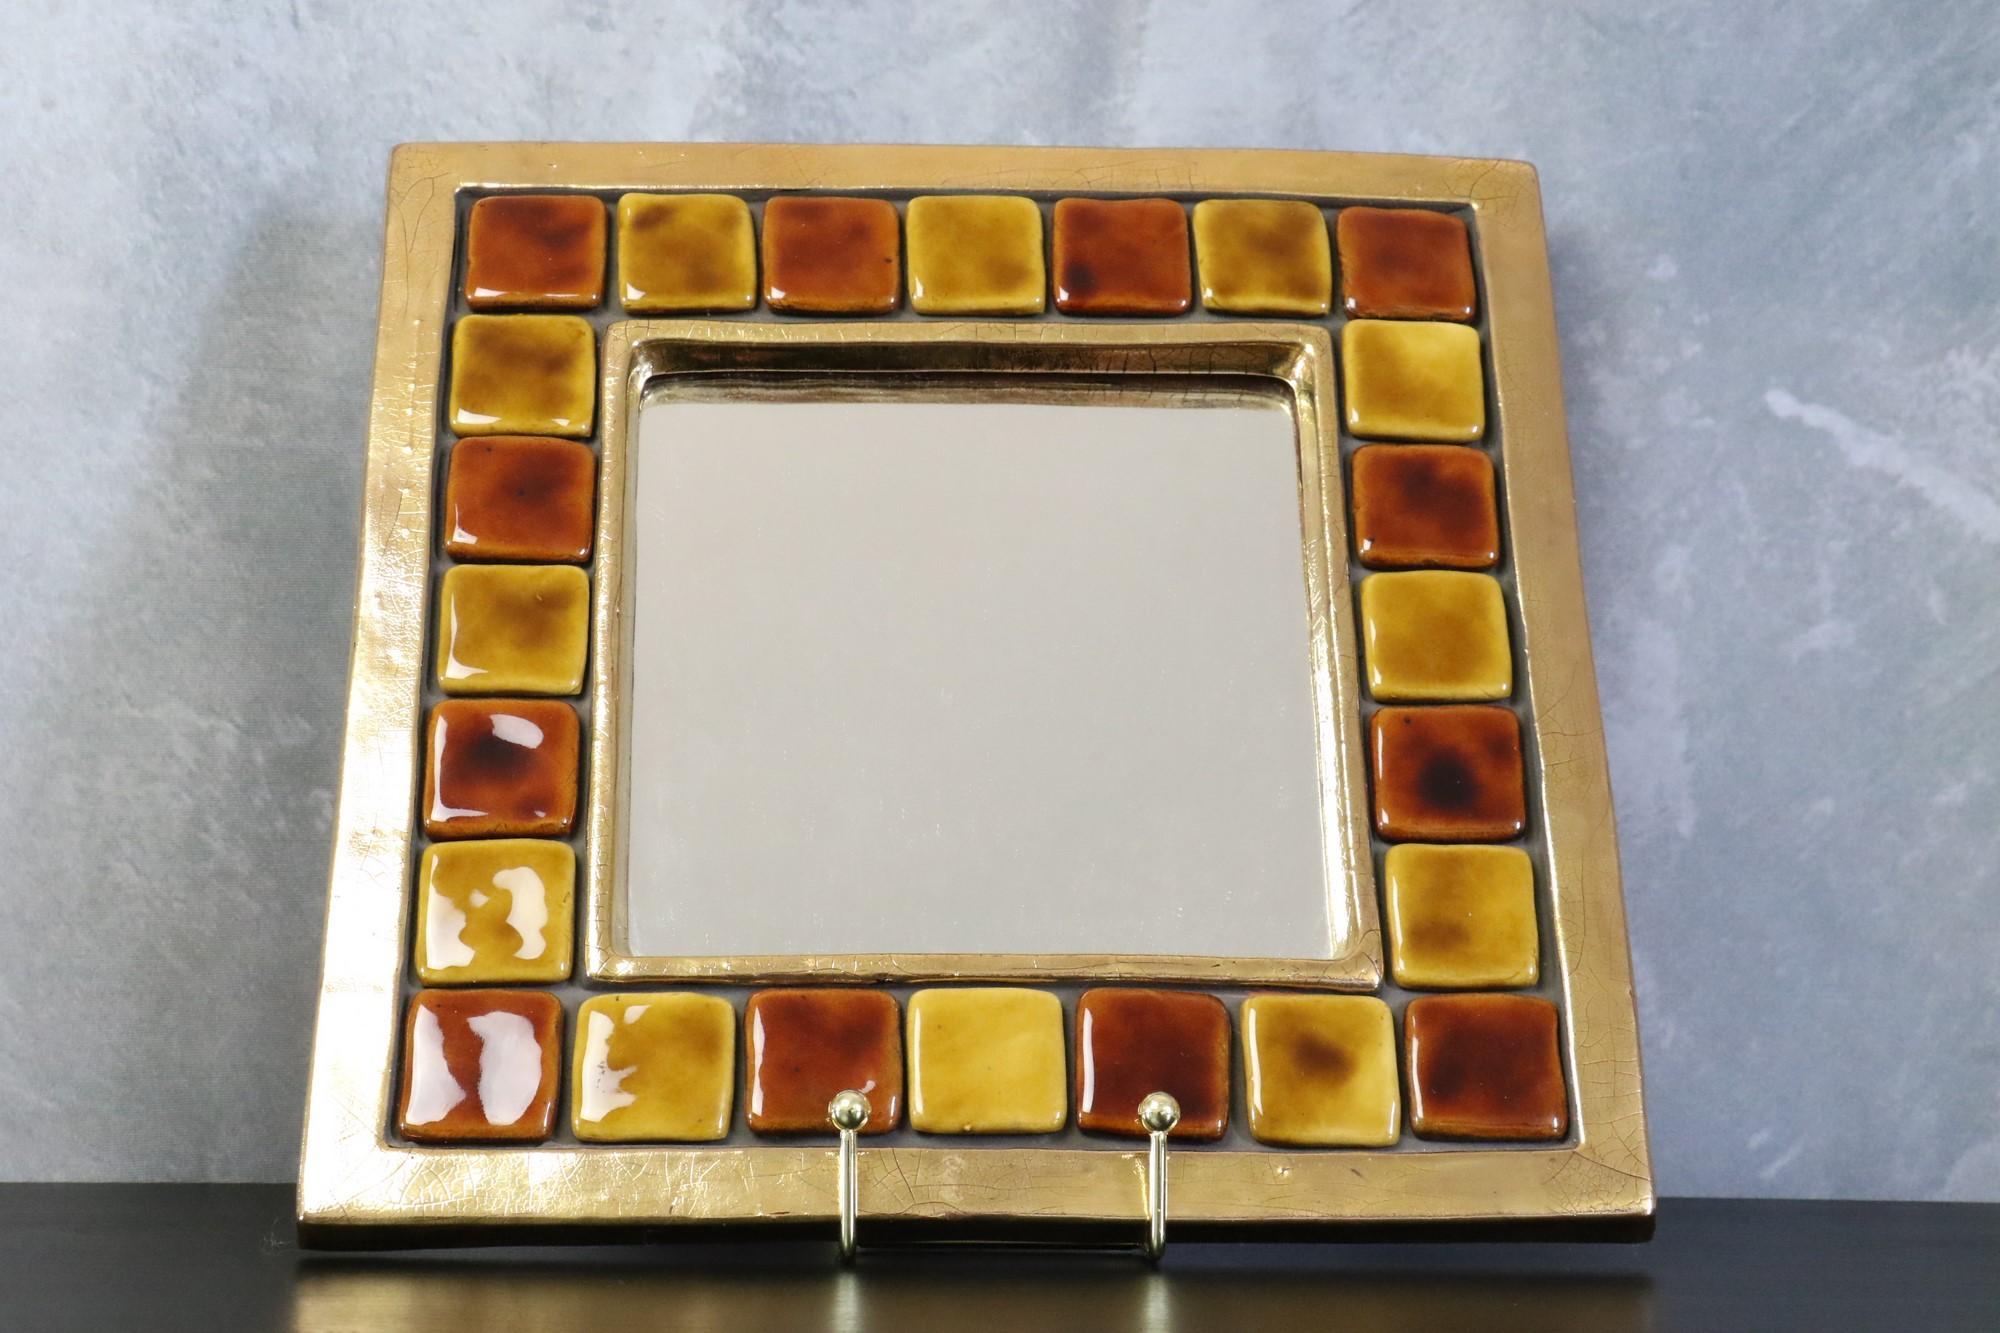 Mithé Espelt, Mid-century French ceramic mirror, circa 1950s, era Line Vautrin

Modèle Patio - Circa 1956 
Ref : Antoine Candau, Mithé Espelt, Edition Odyssée, Graulhet 2020, same as page 112

The ochre and gold tones and the use of the crackle are